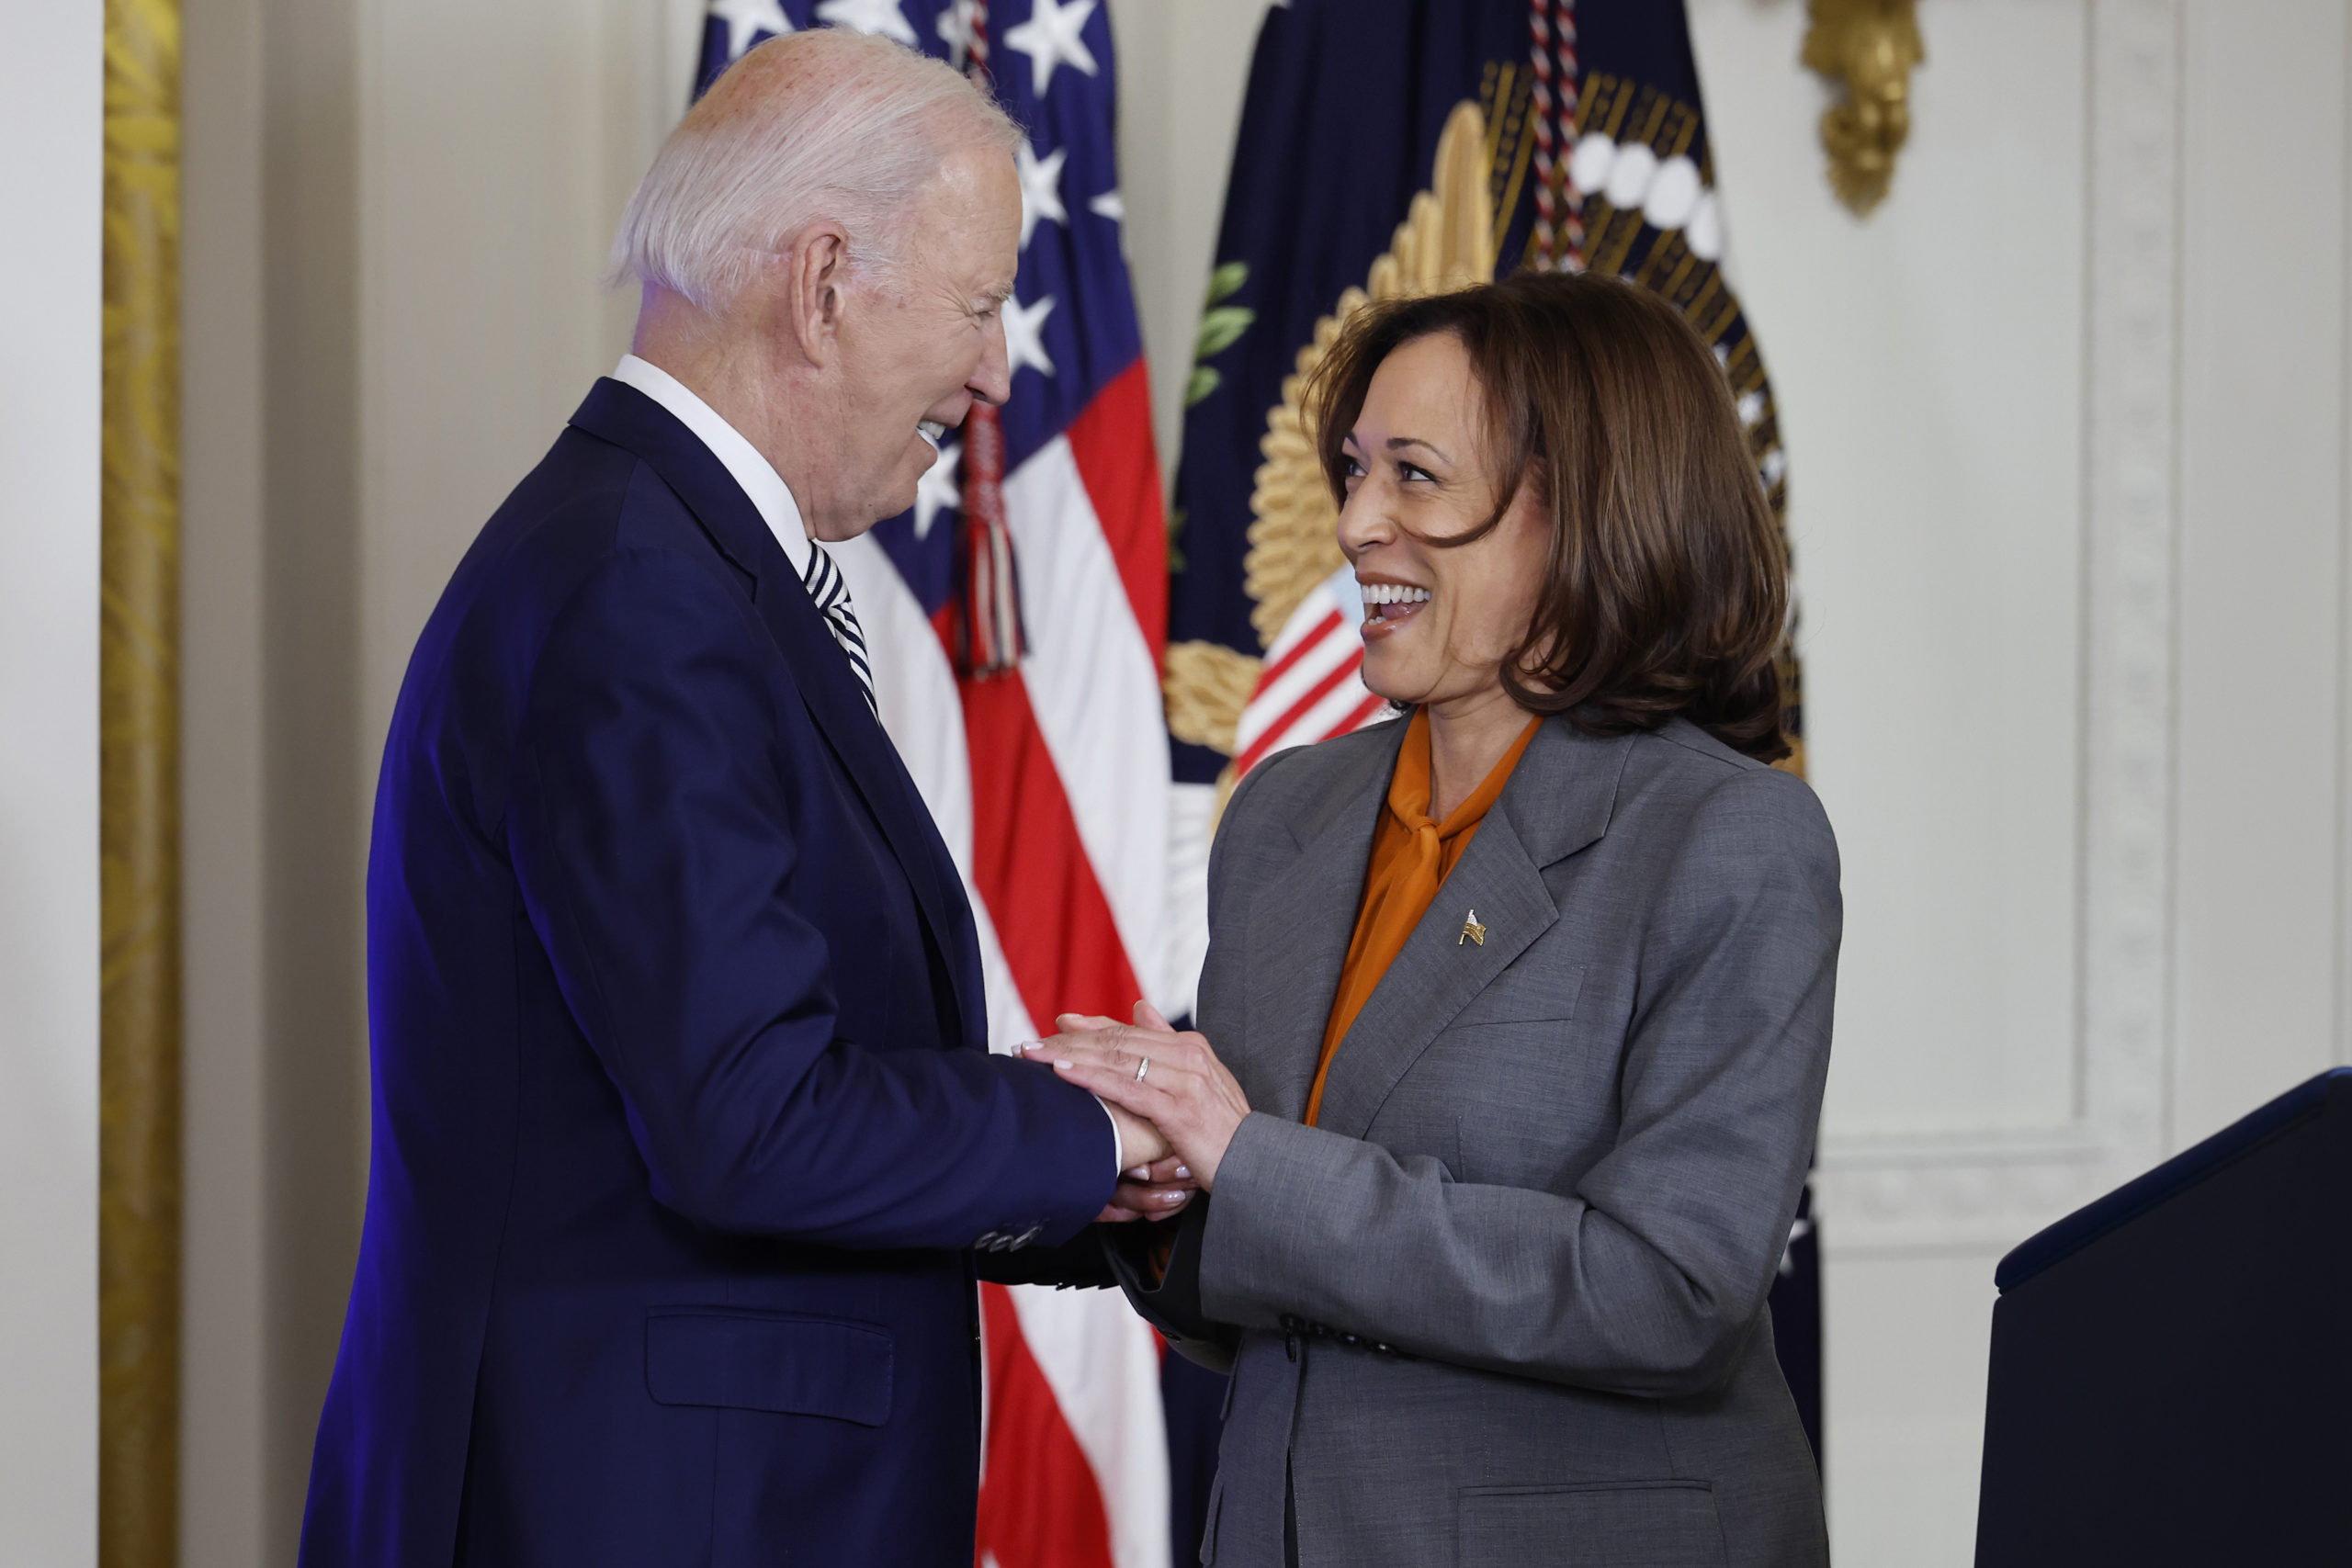 U.S. Vice President Kamala Harris introduces President Joe Biden during an event about their administration's work to regulate artificial intelligence in the East Room of the White House on October 30, 2023 in Washington, DC. President Biden issued a new executive order on Monday, directing his administration to create a new chief AI officer, track companies developing the most powerful AI systems, adopt stronger privacy policies and "both deploy AI and guard against its possible bias," creating new safety guidelines and industry standards. (Photo by Chip Somodevilla/Getty Images)